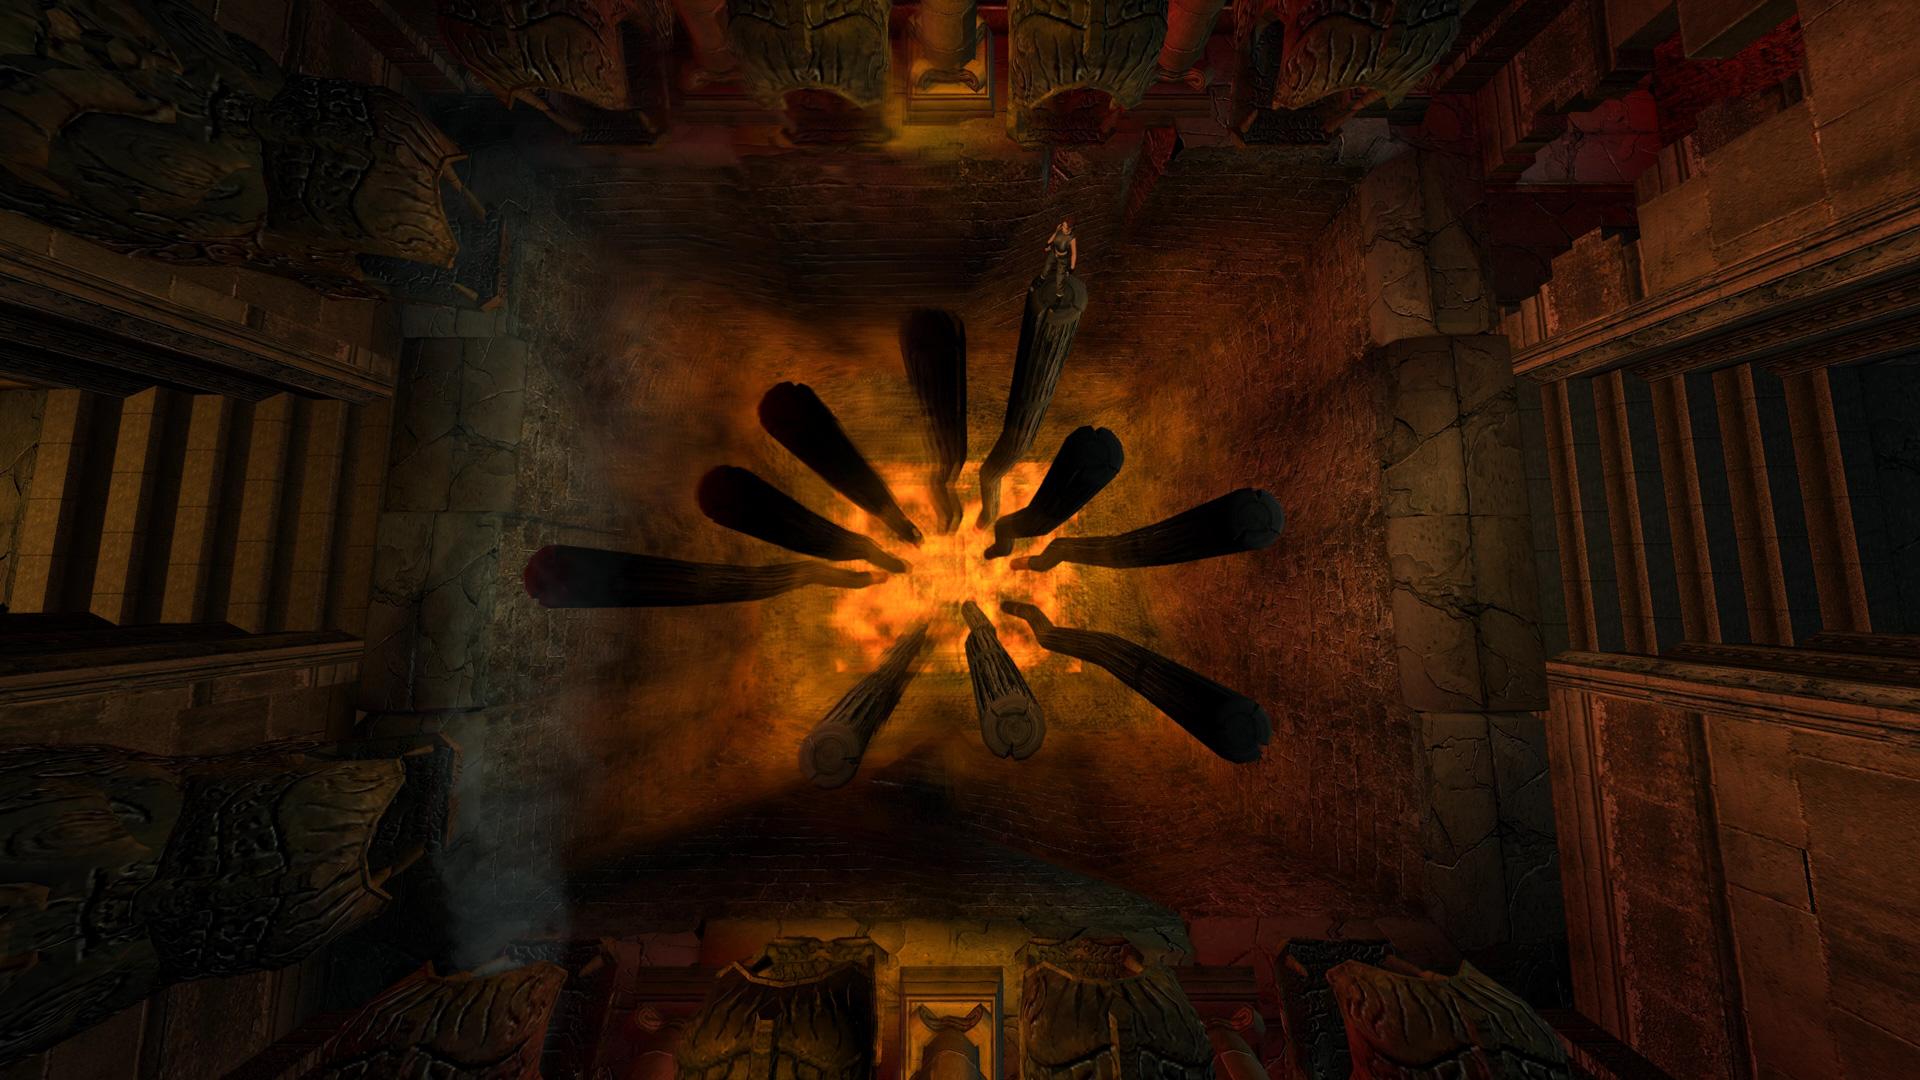 Lara Croft in the Breath of Hades room in Tomb Raider: The Angel of Darkness.